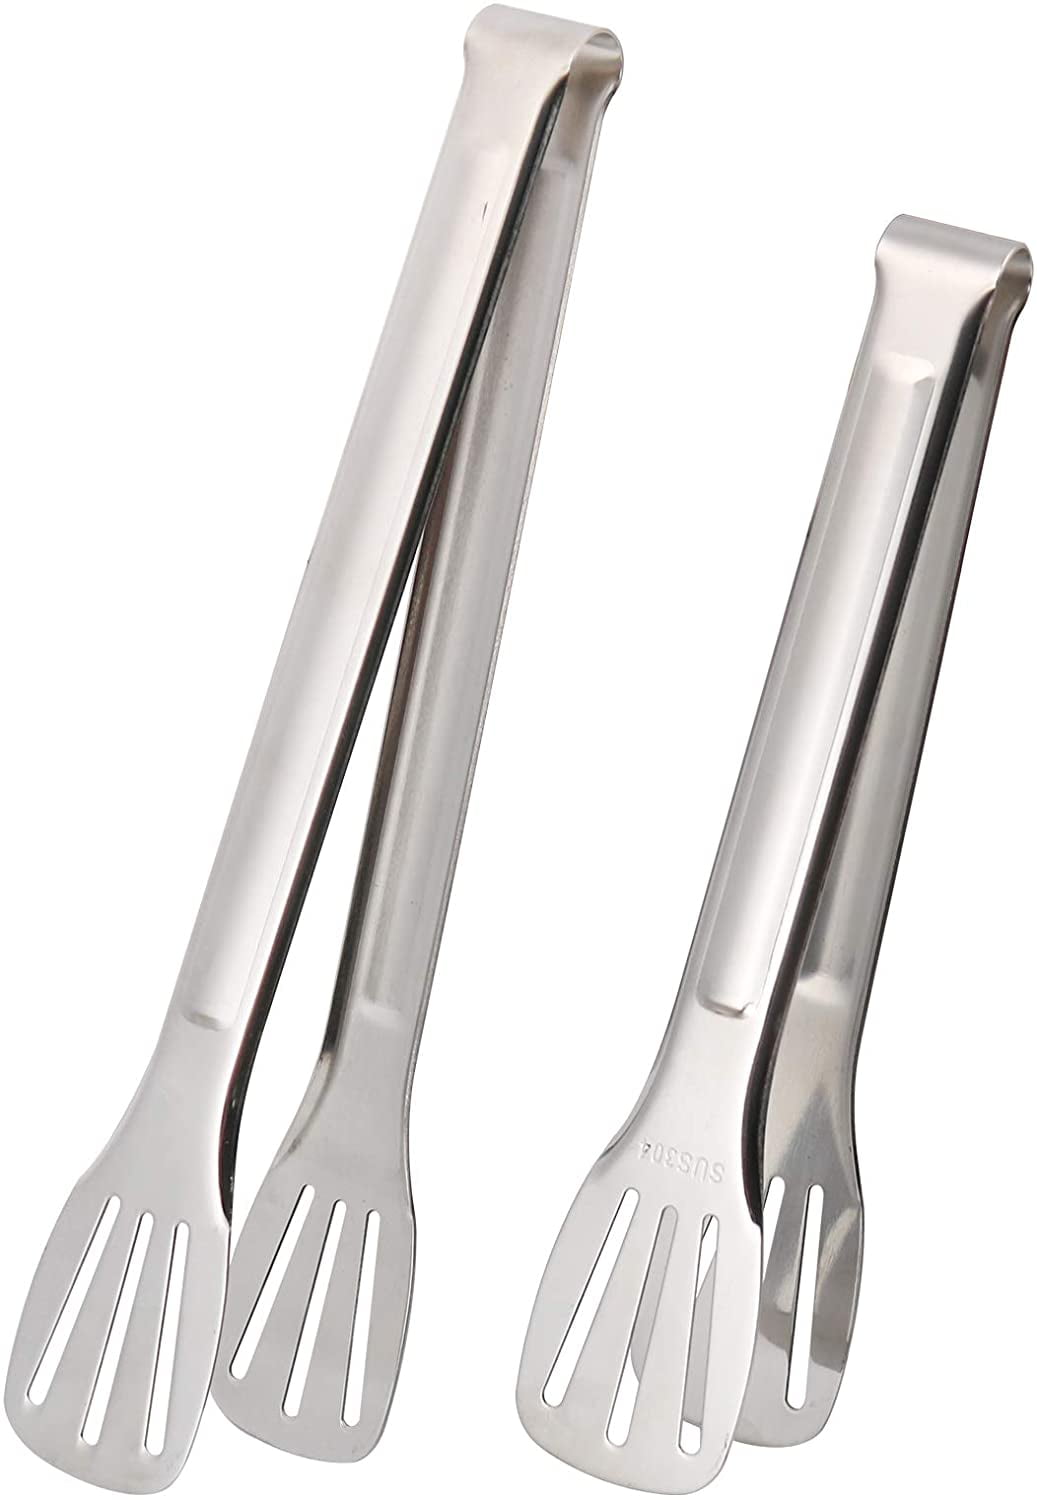 2 Pack Stainless Steel Kitchen Tongs Grill serving salad NEW 